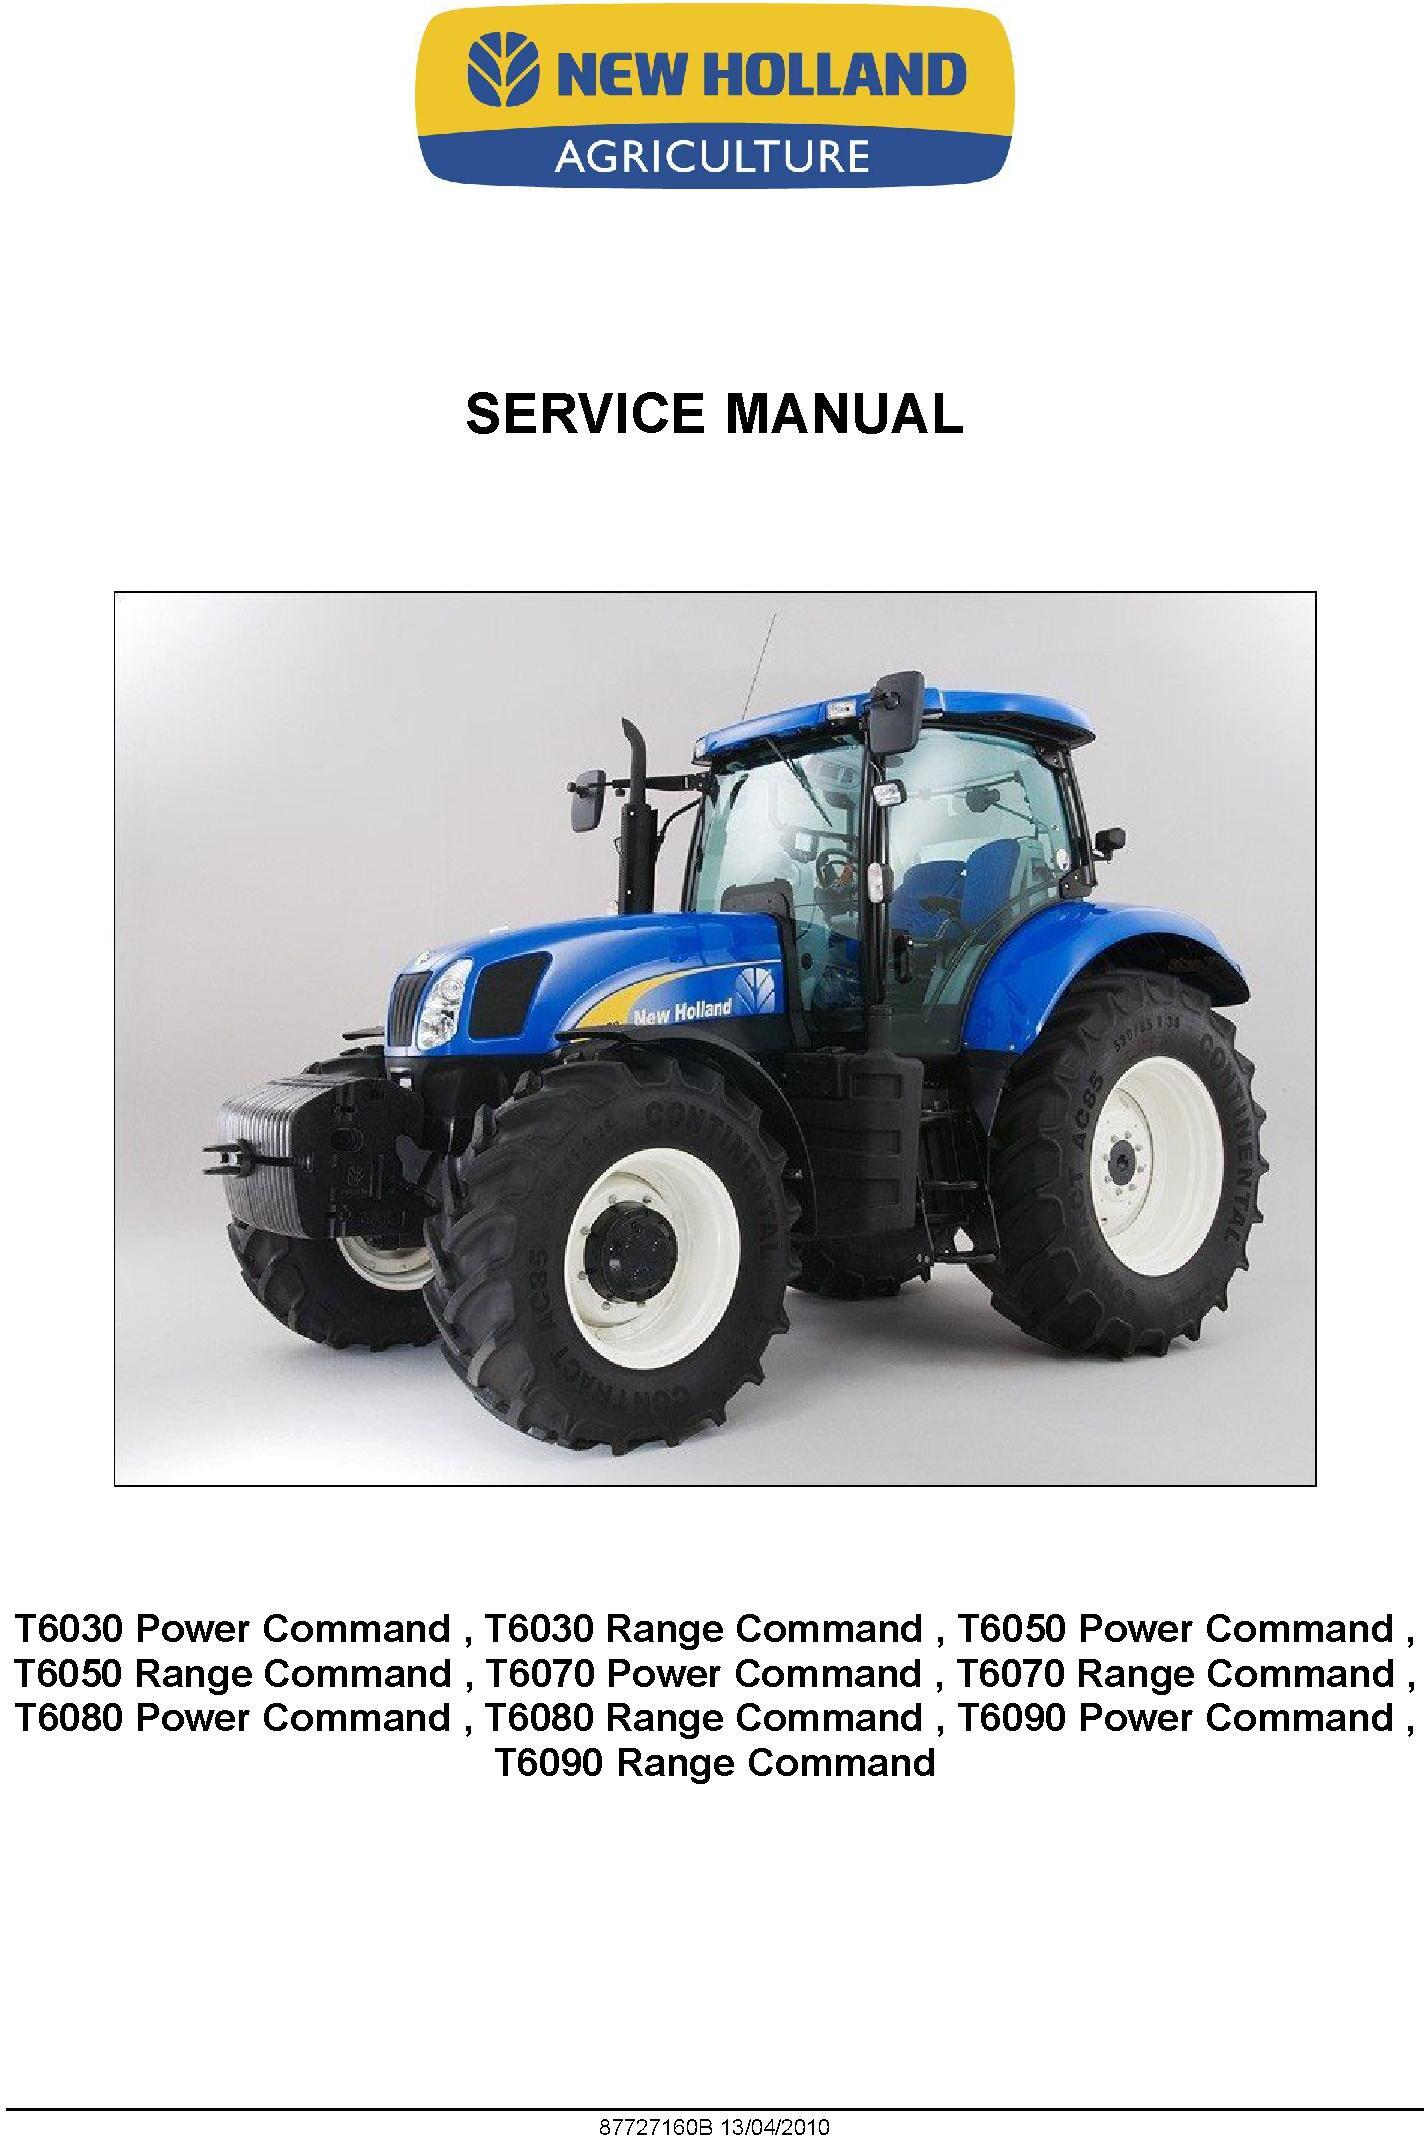 New Holland T6030, T6050, T6070, T6080, T6090 Power Command & Range Command Tractor Service Manual